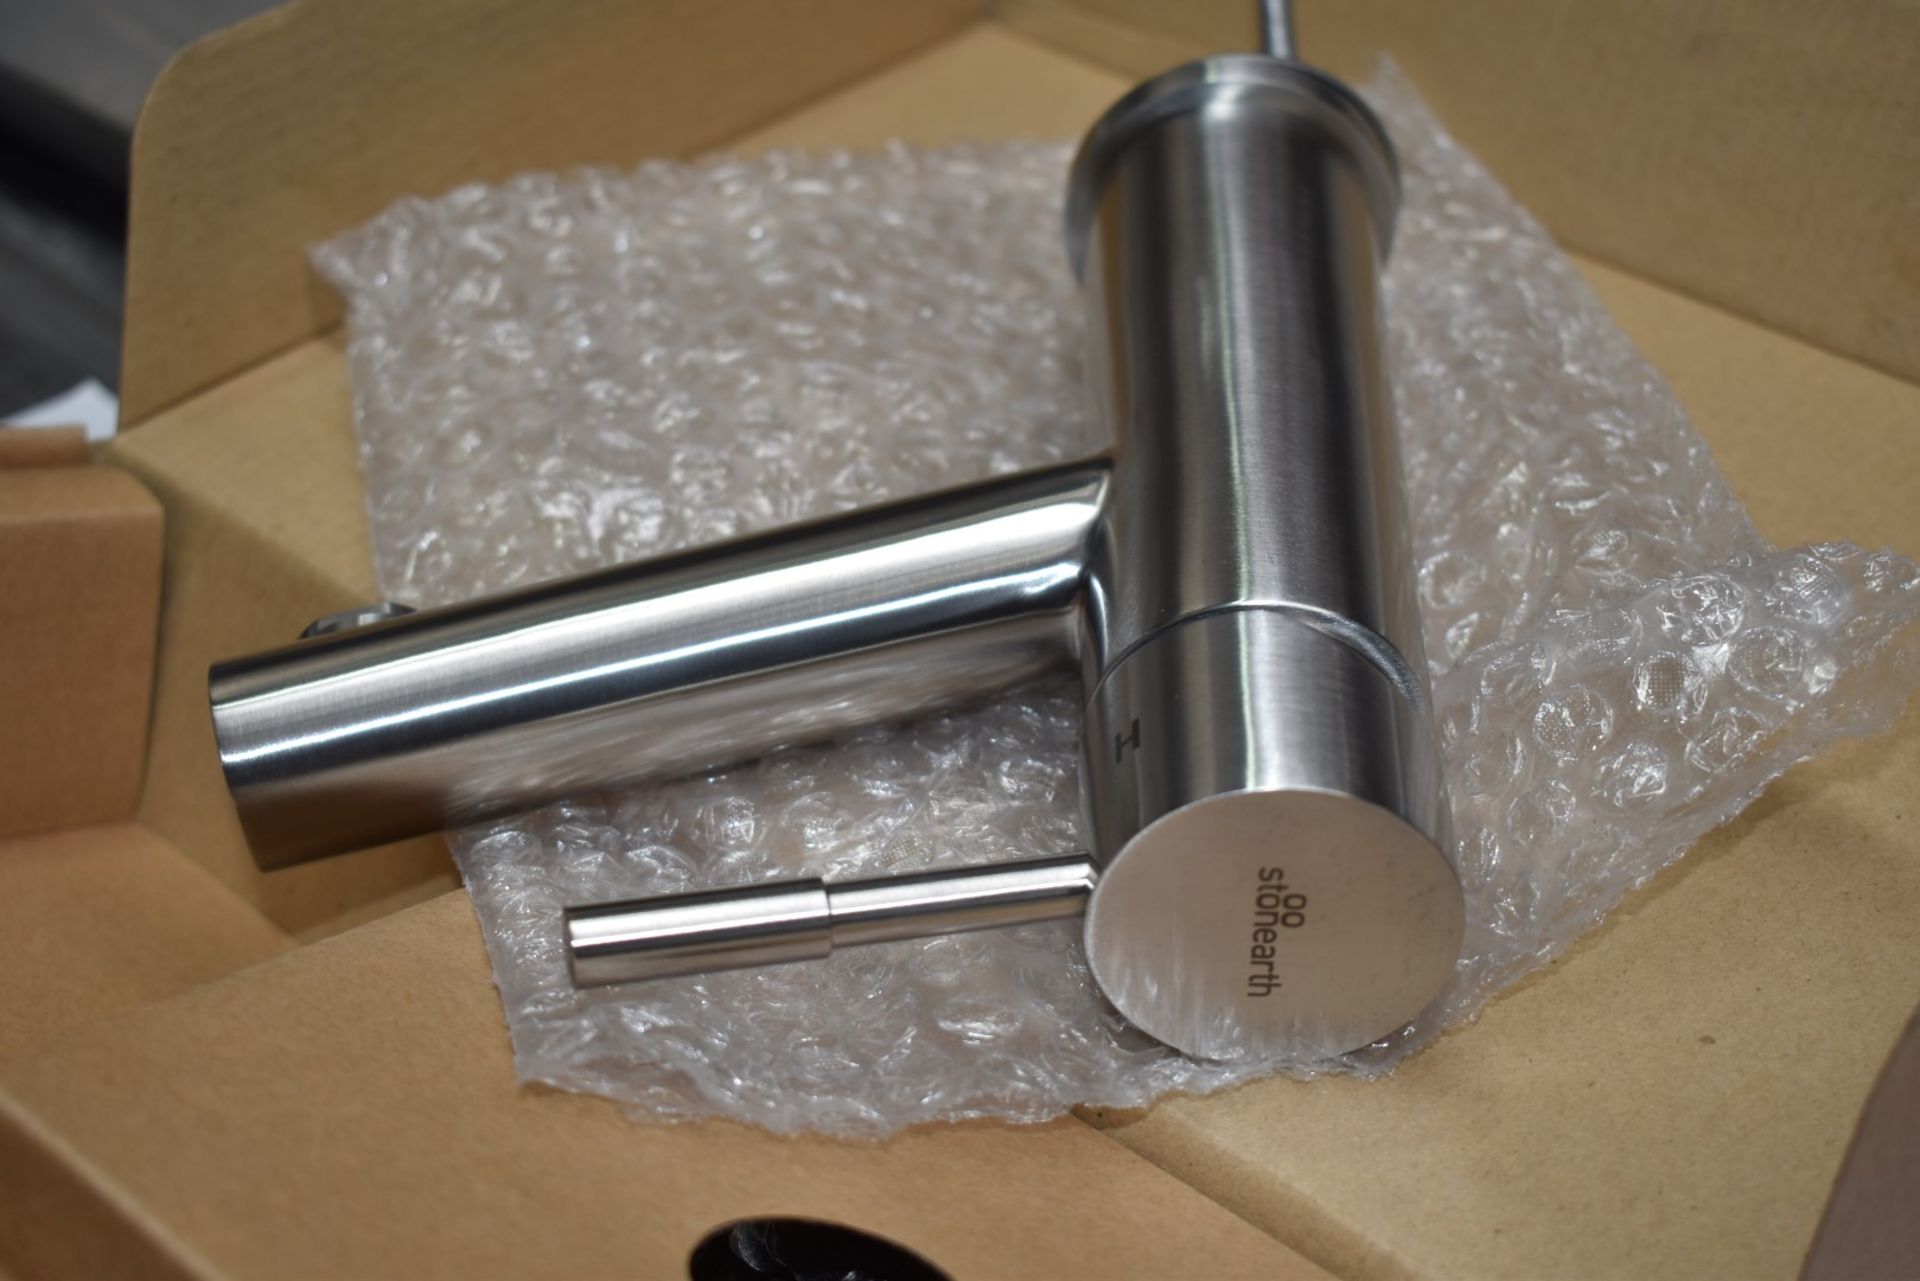 1 x Stonearth 'Hali' Stainless Steel Basin Mixer Tap - Brand New & Boxed - RRP £245 - Ref: TP801 WH2 - Image 5 of 7